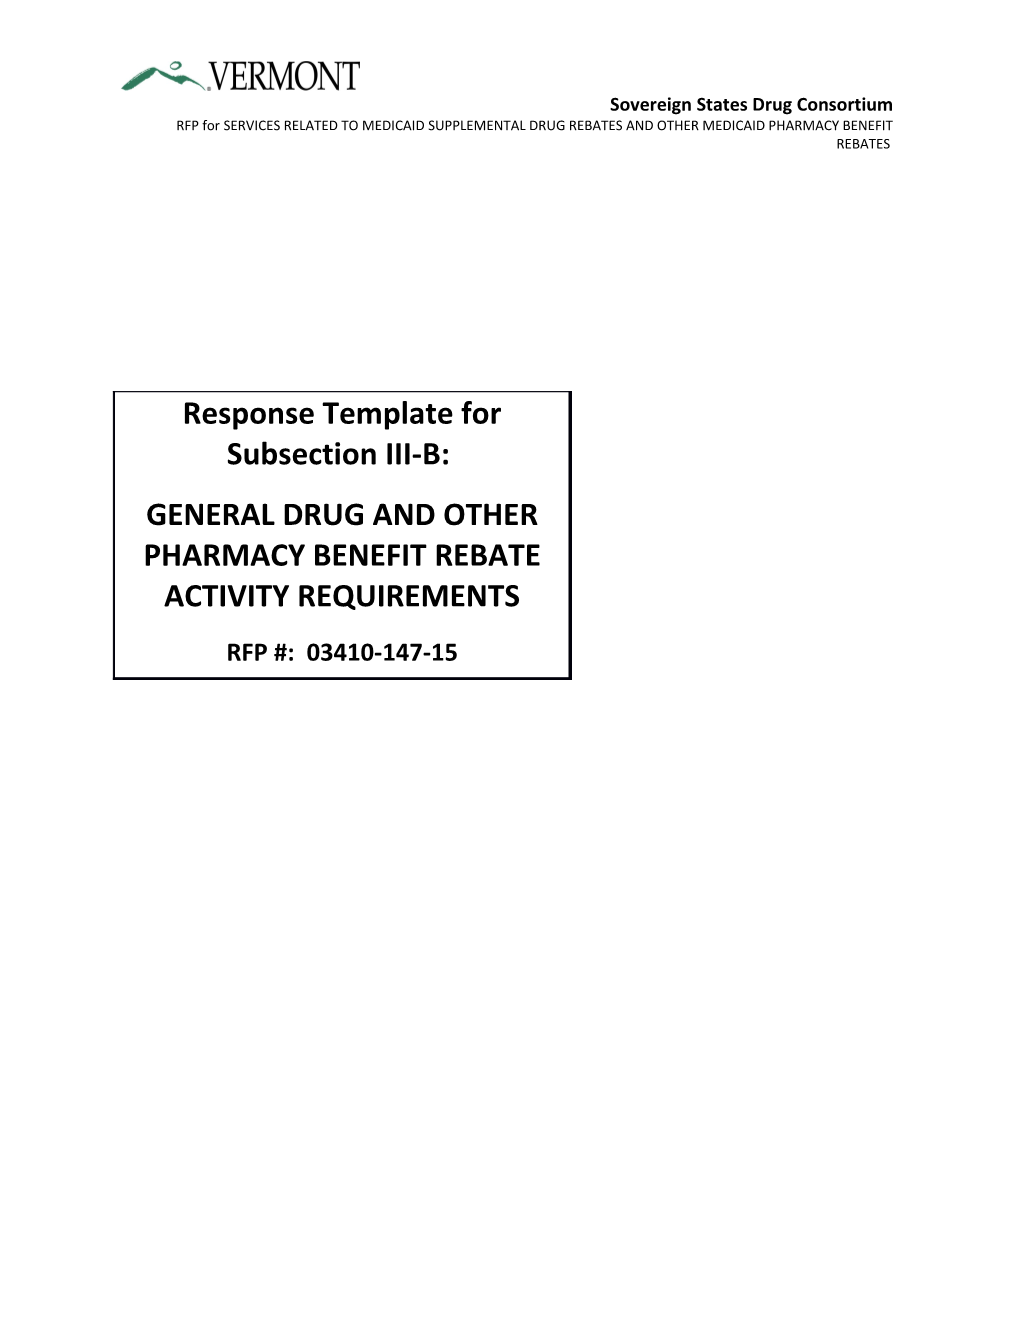 General Drug and Other Pharmacy Benefit Rebate Activity Requirements